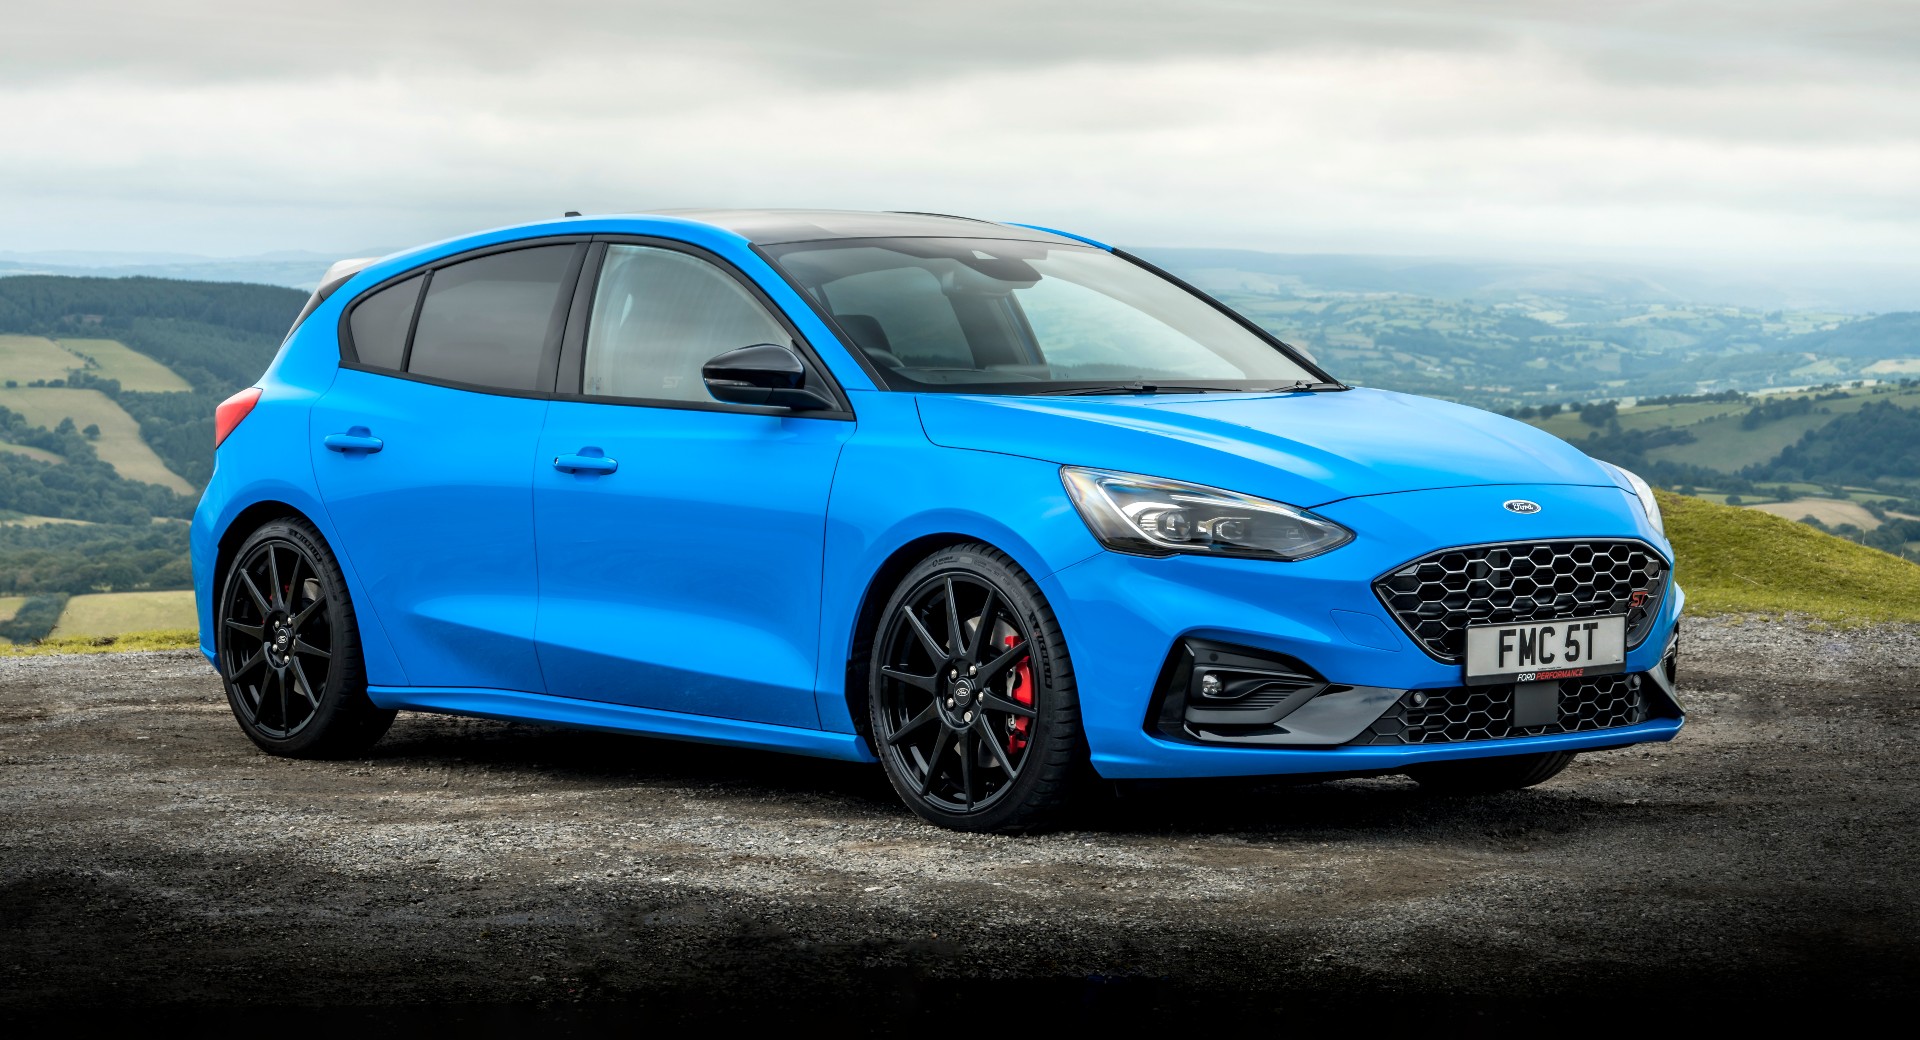 Ford Focus ST Edition Is The Most Capable Yet Thanks To Upgraded Suspension |